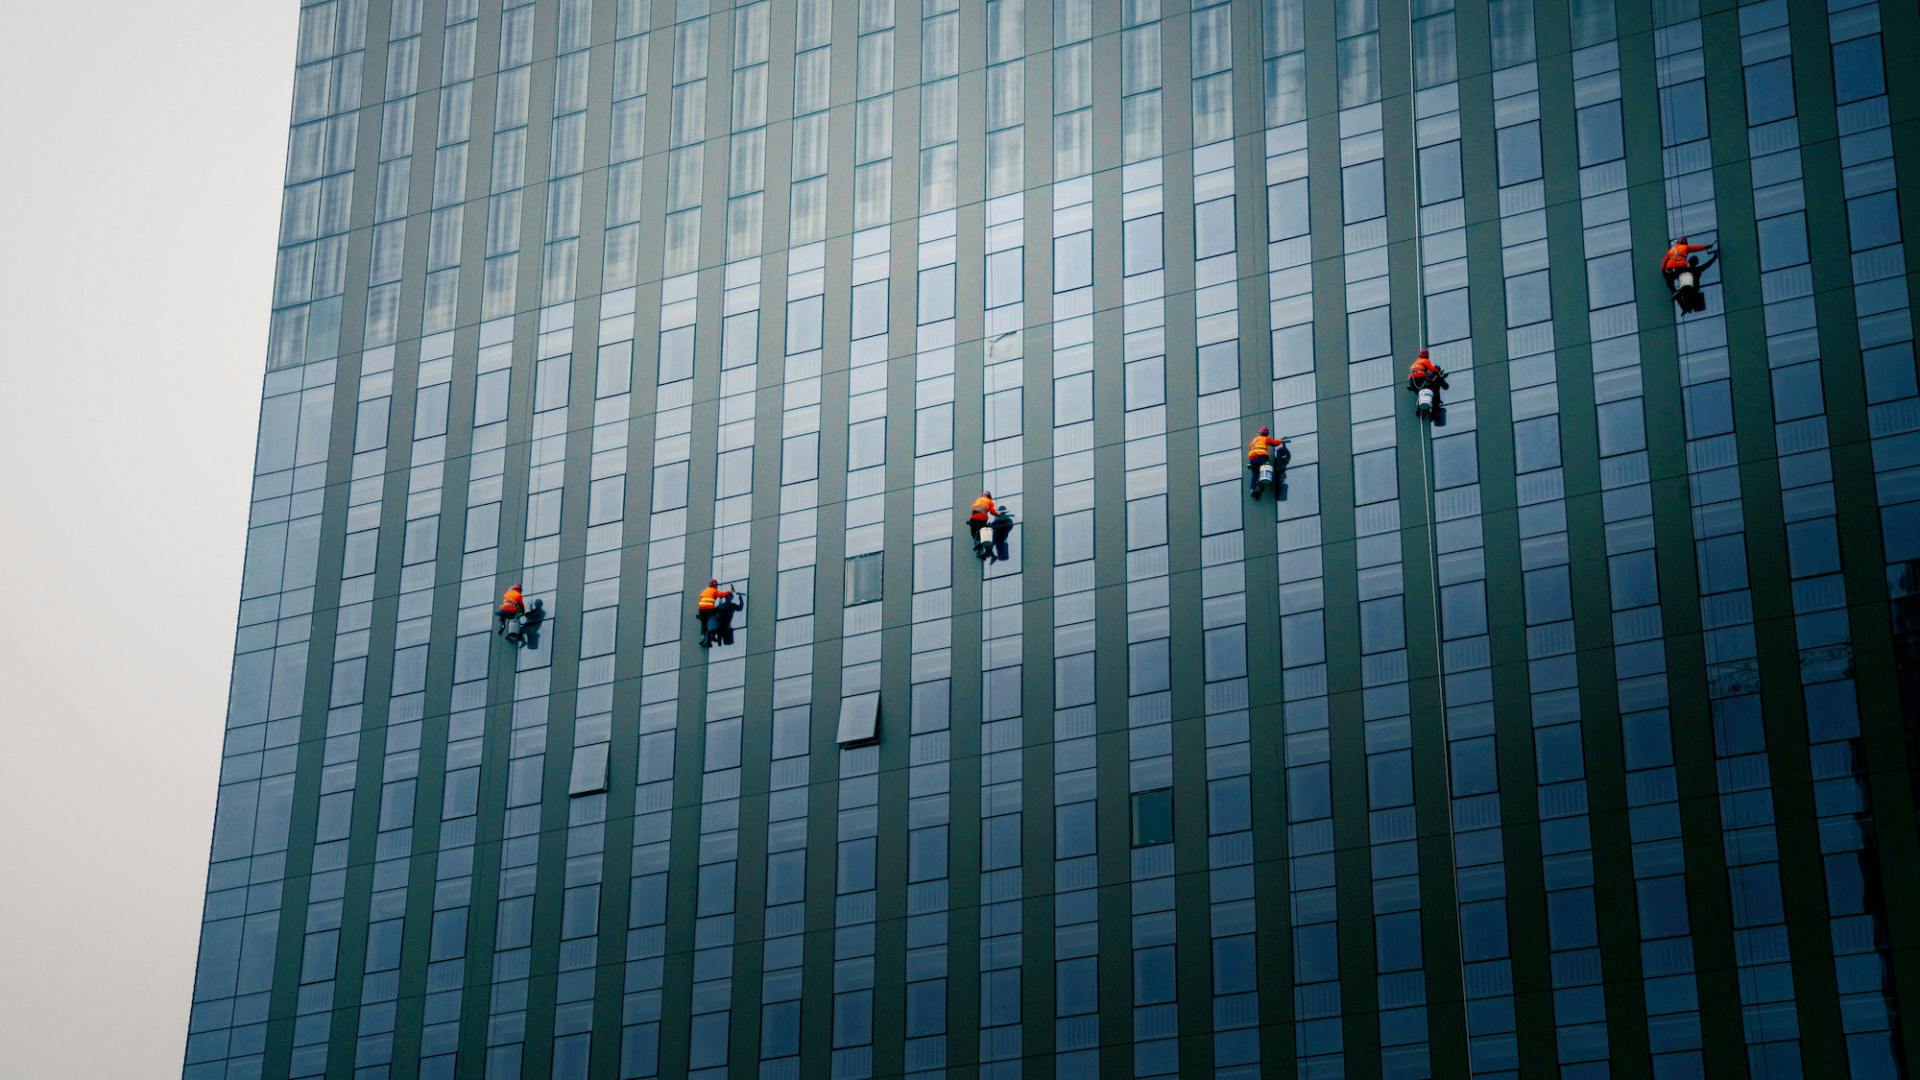 09_Cleaning the exterior walls of a 43-story high rise 226:227